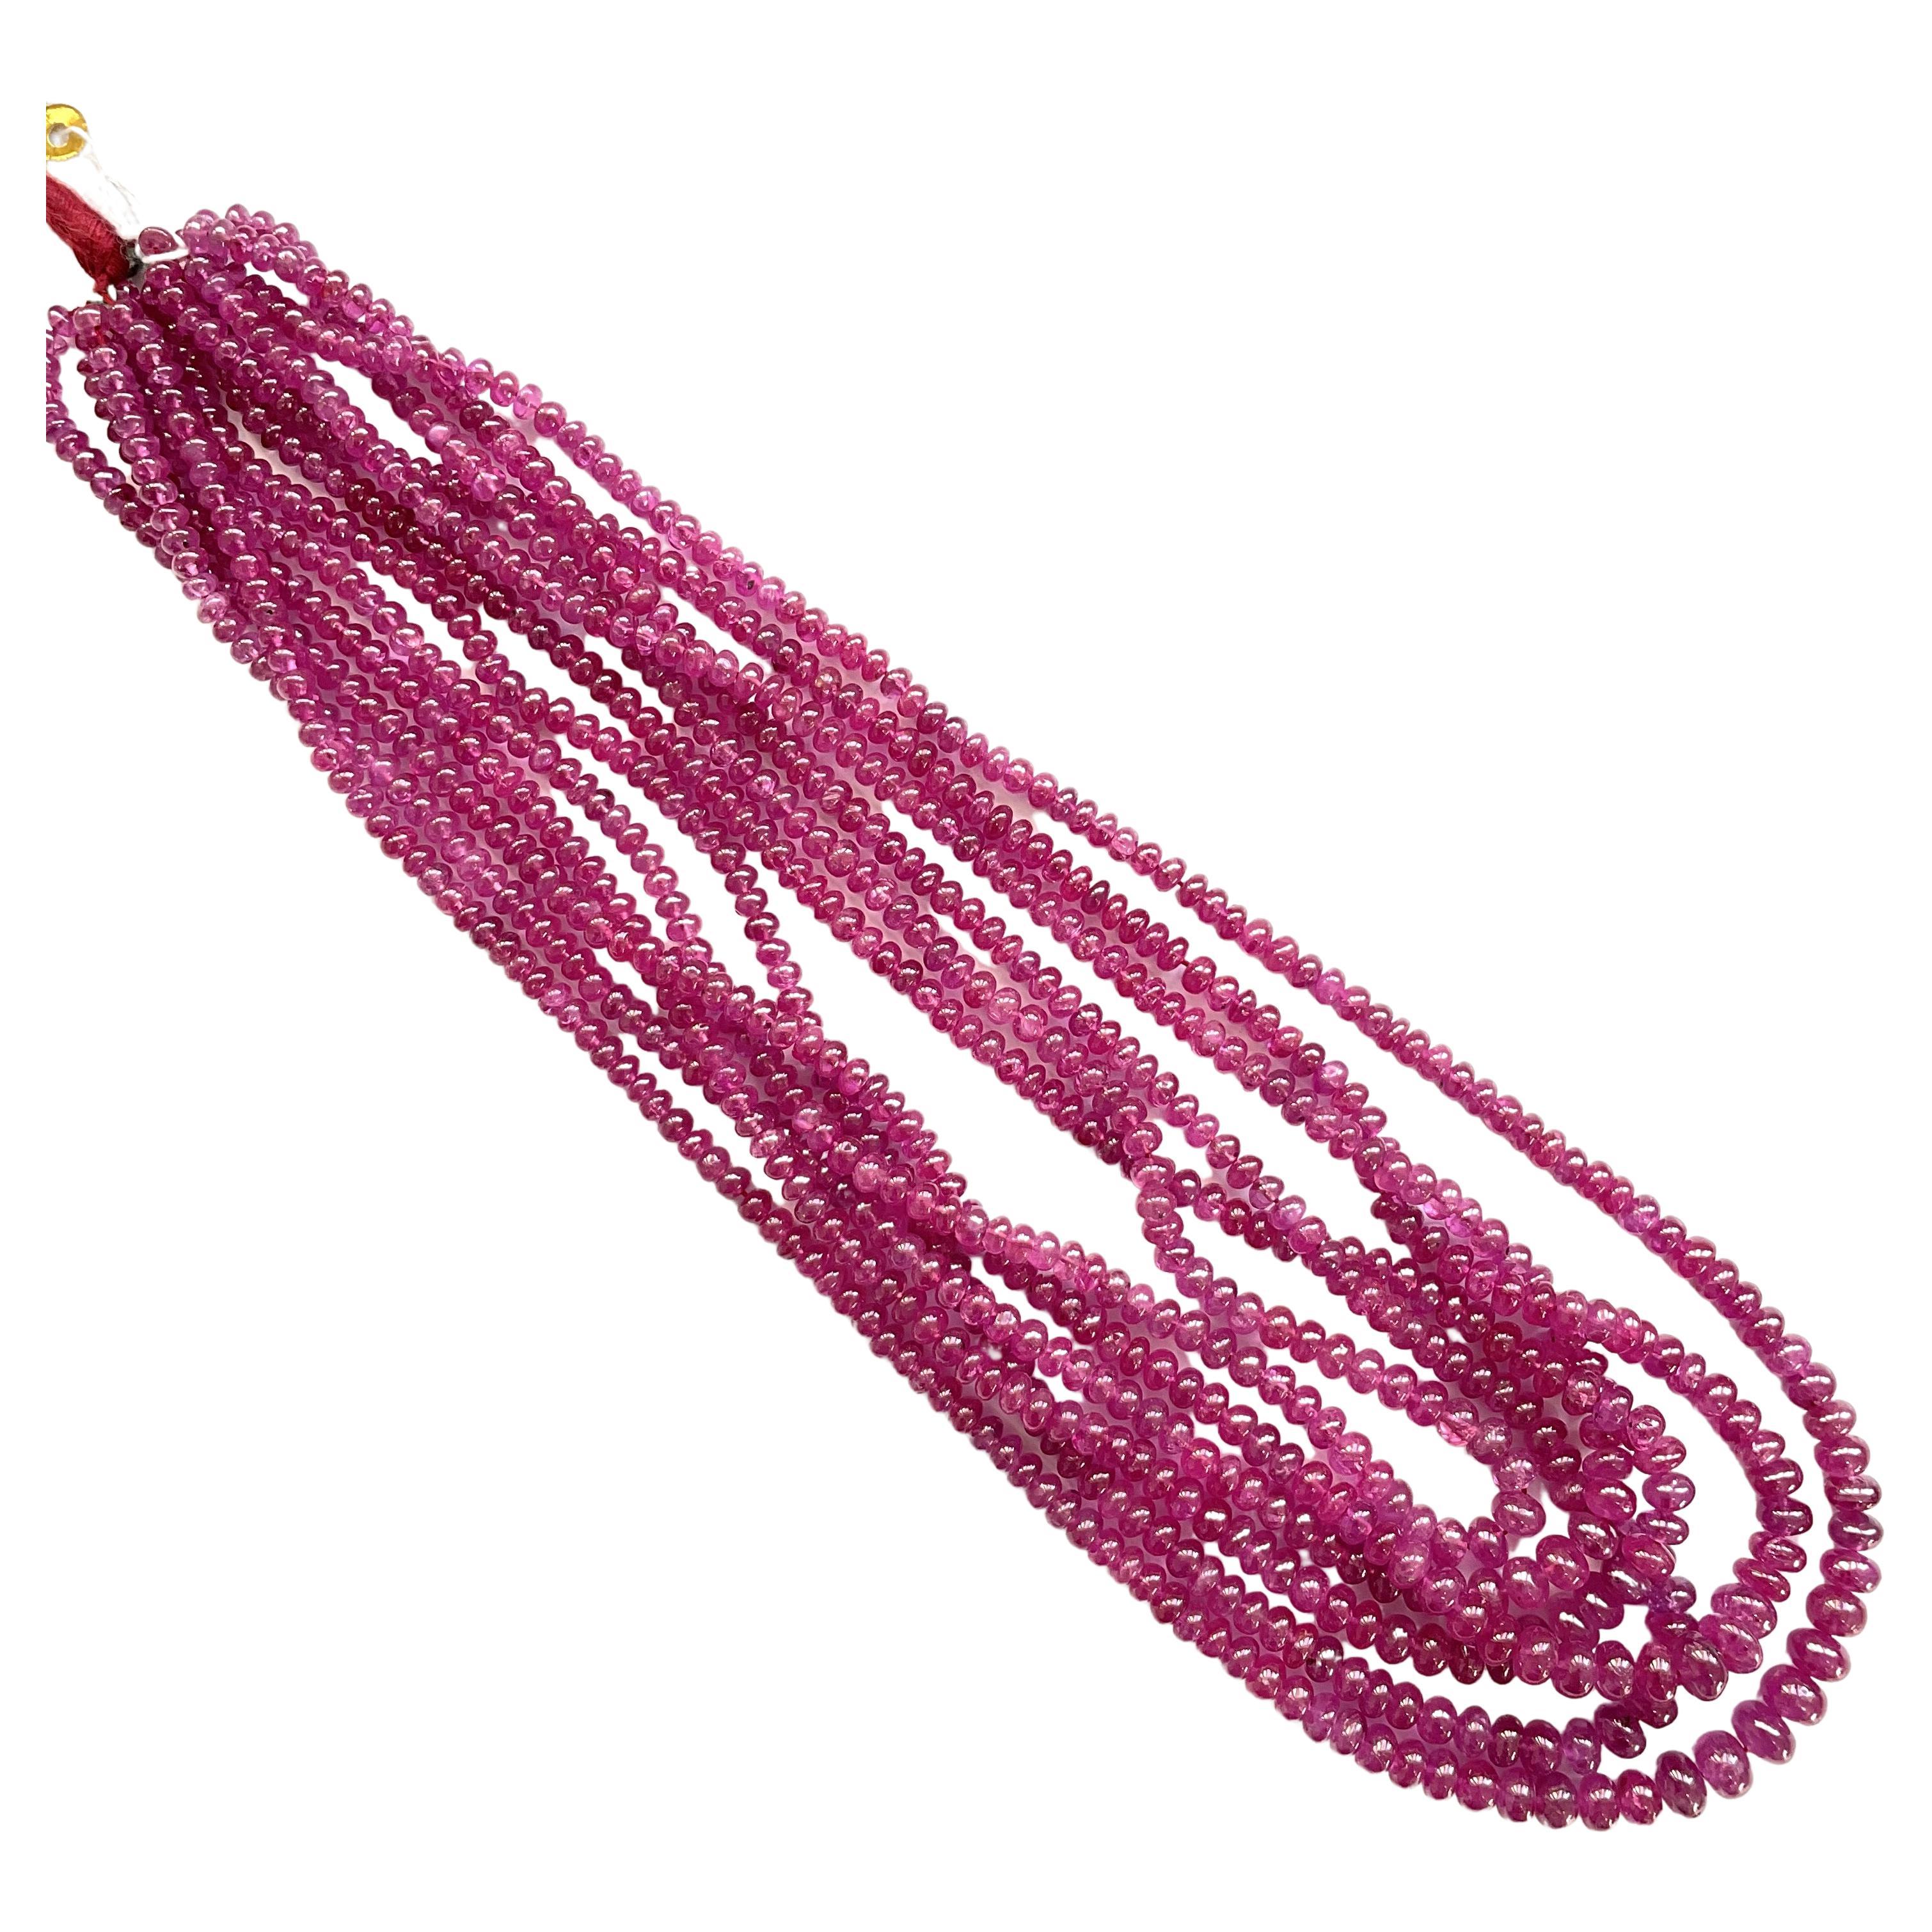 Certified 620.66 Carats Burma Ruby Top Quality Beads For Jewellery Natural Gems For Sale